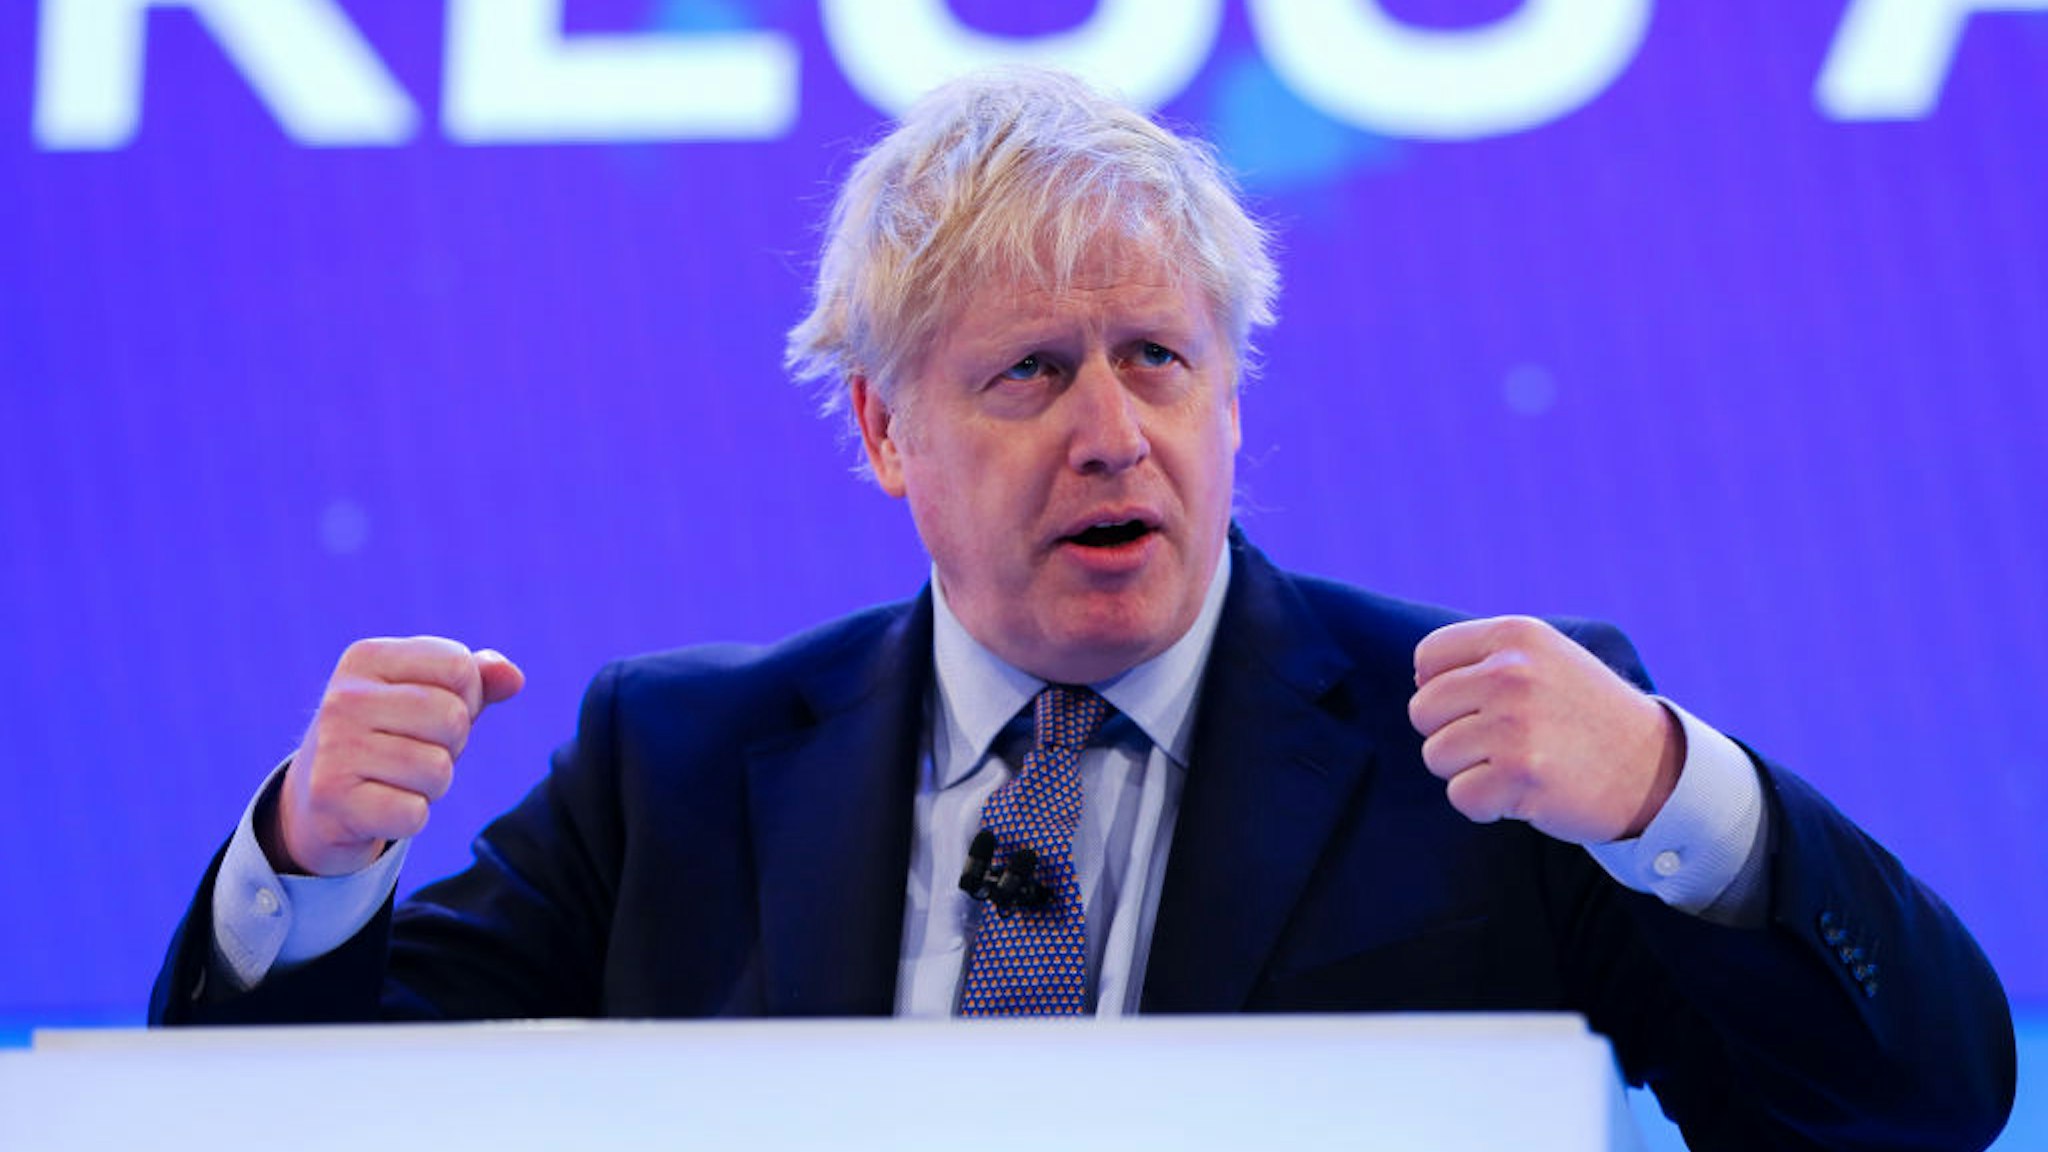 A file photo dated on November 18, 2019 shows British Prime Minister Boris Johnson making a keynote speech at the annual CBI (Confederation of British Industry) conference at Intercontinental Hotel, Greenwich, in London, United Kingdom. British Prime Minister Boris Johnson tests positive for COVID-19.